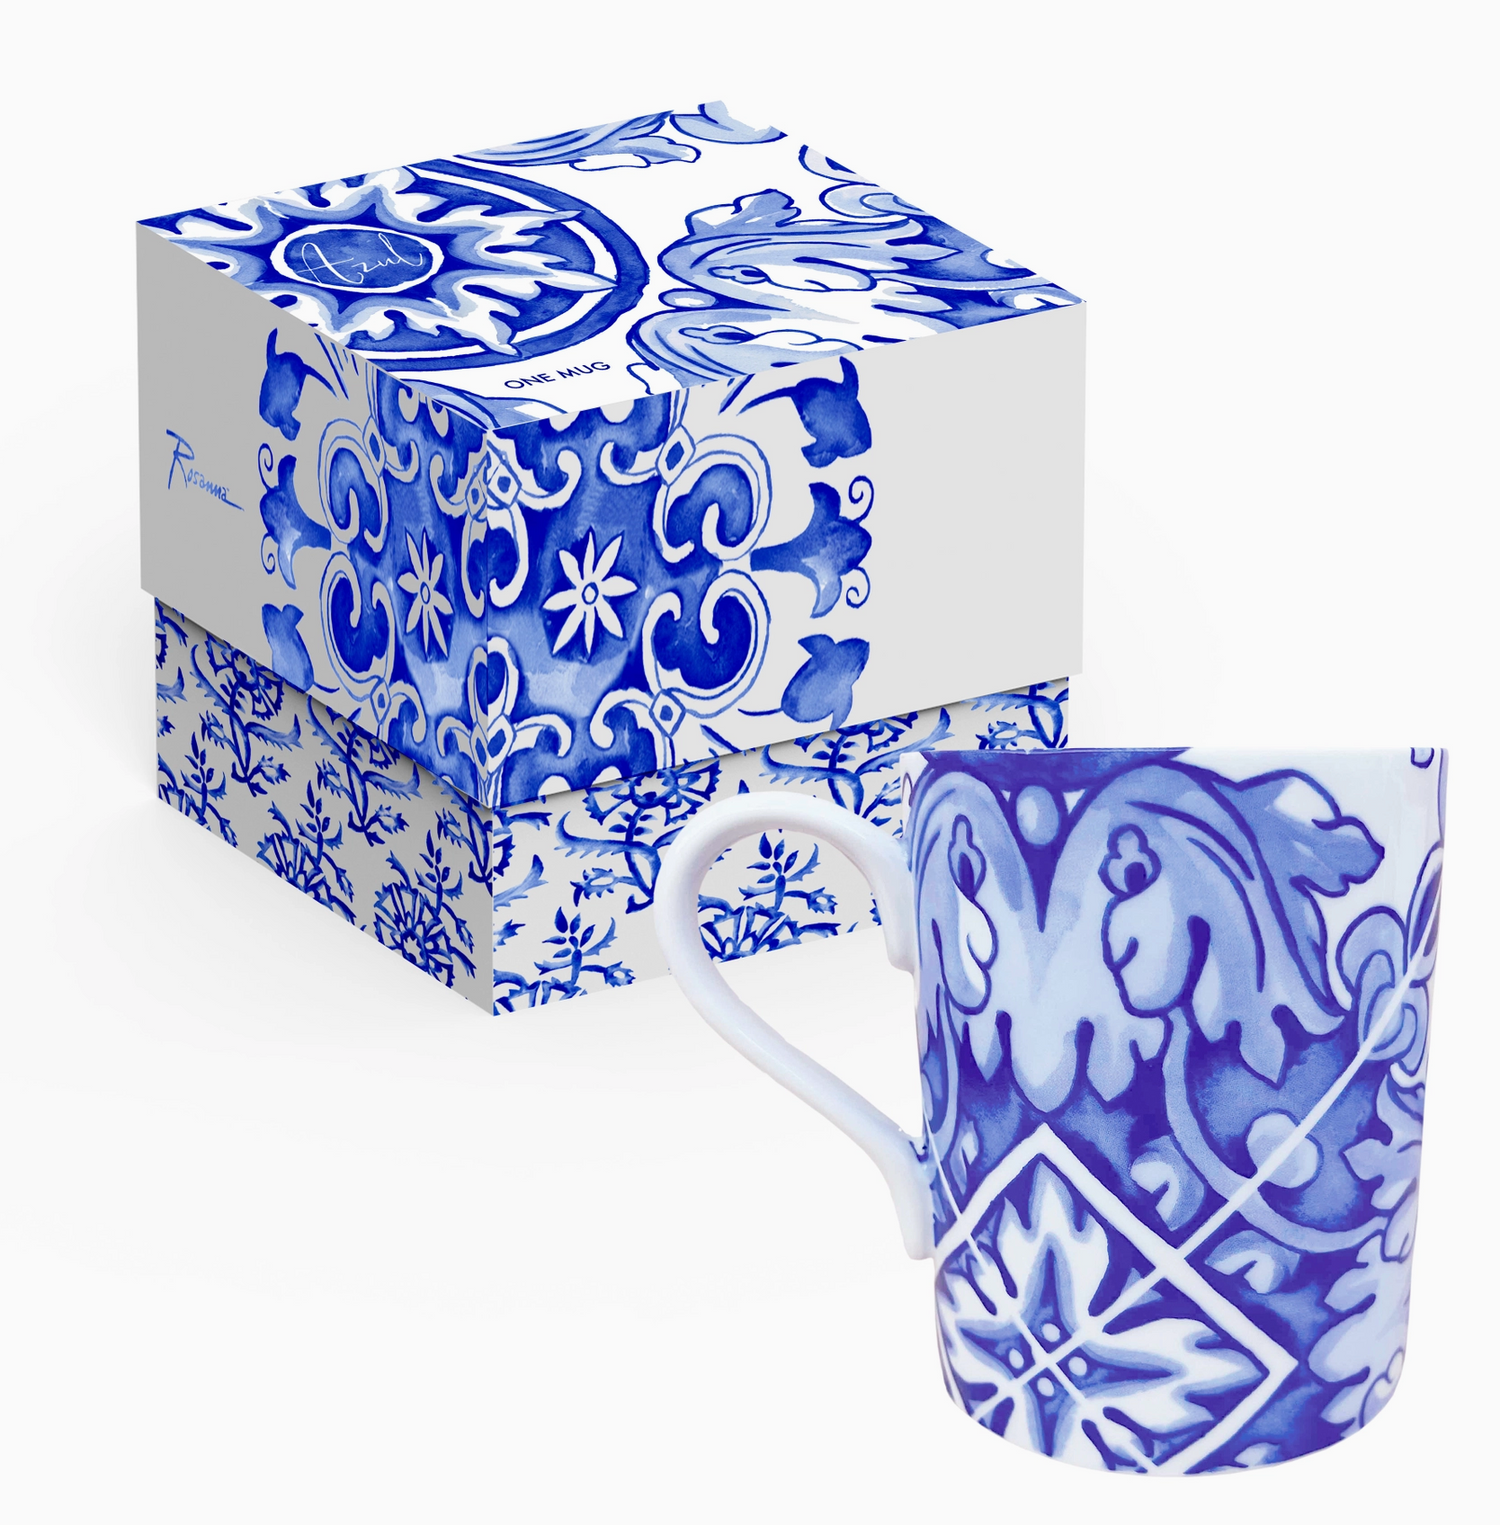 Azul Blue and White painted mugs in gift box- By Rosanna Designs